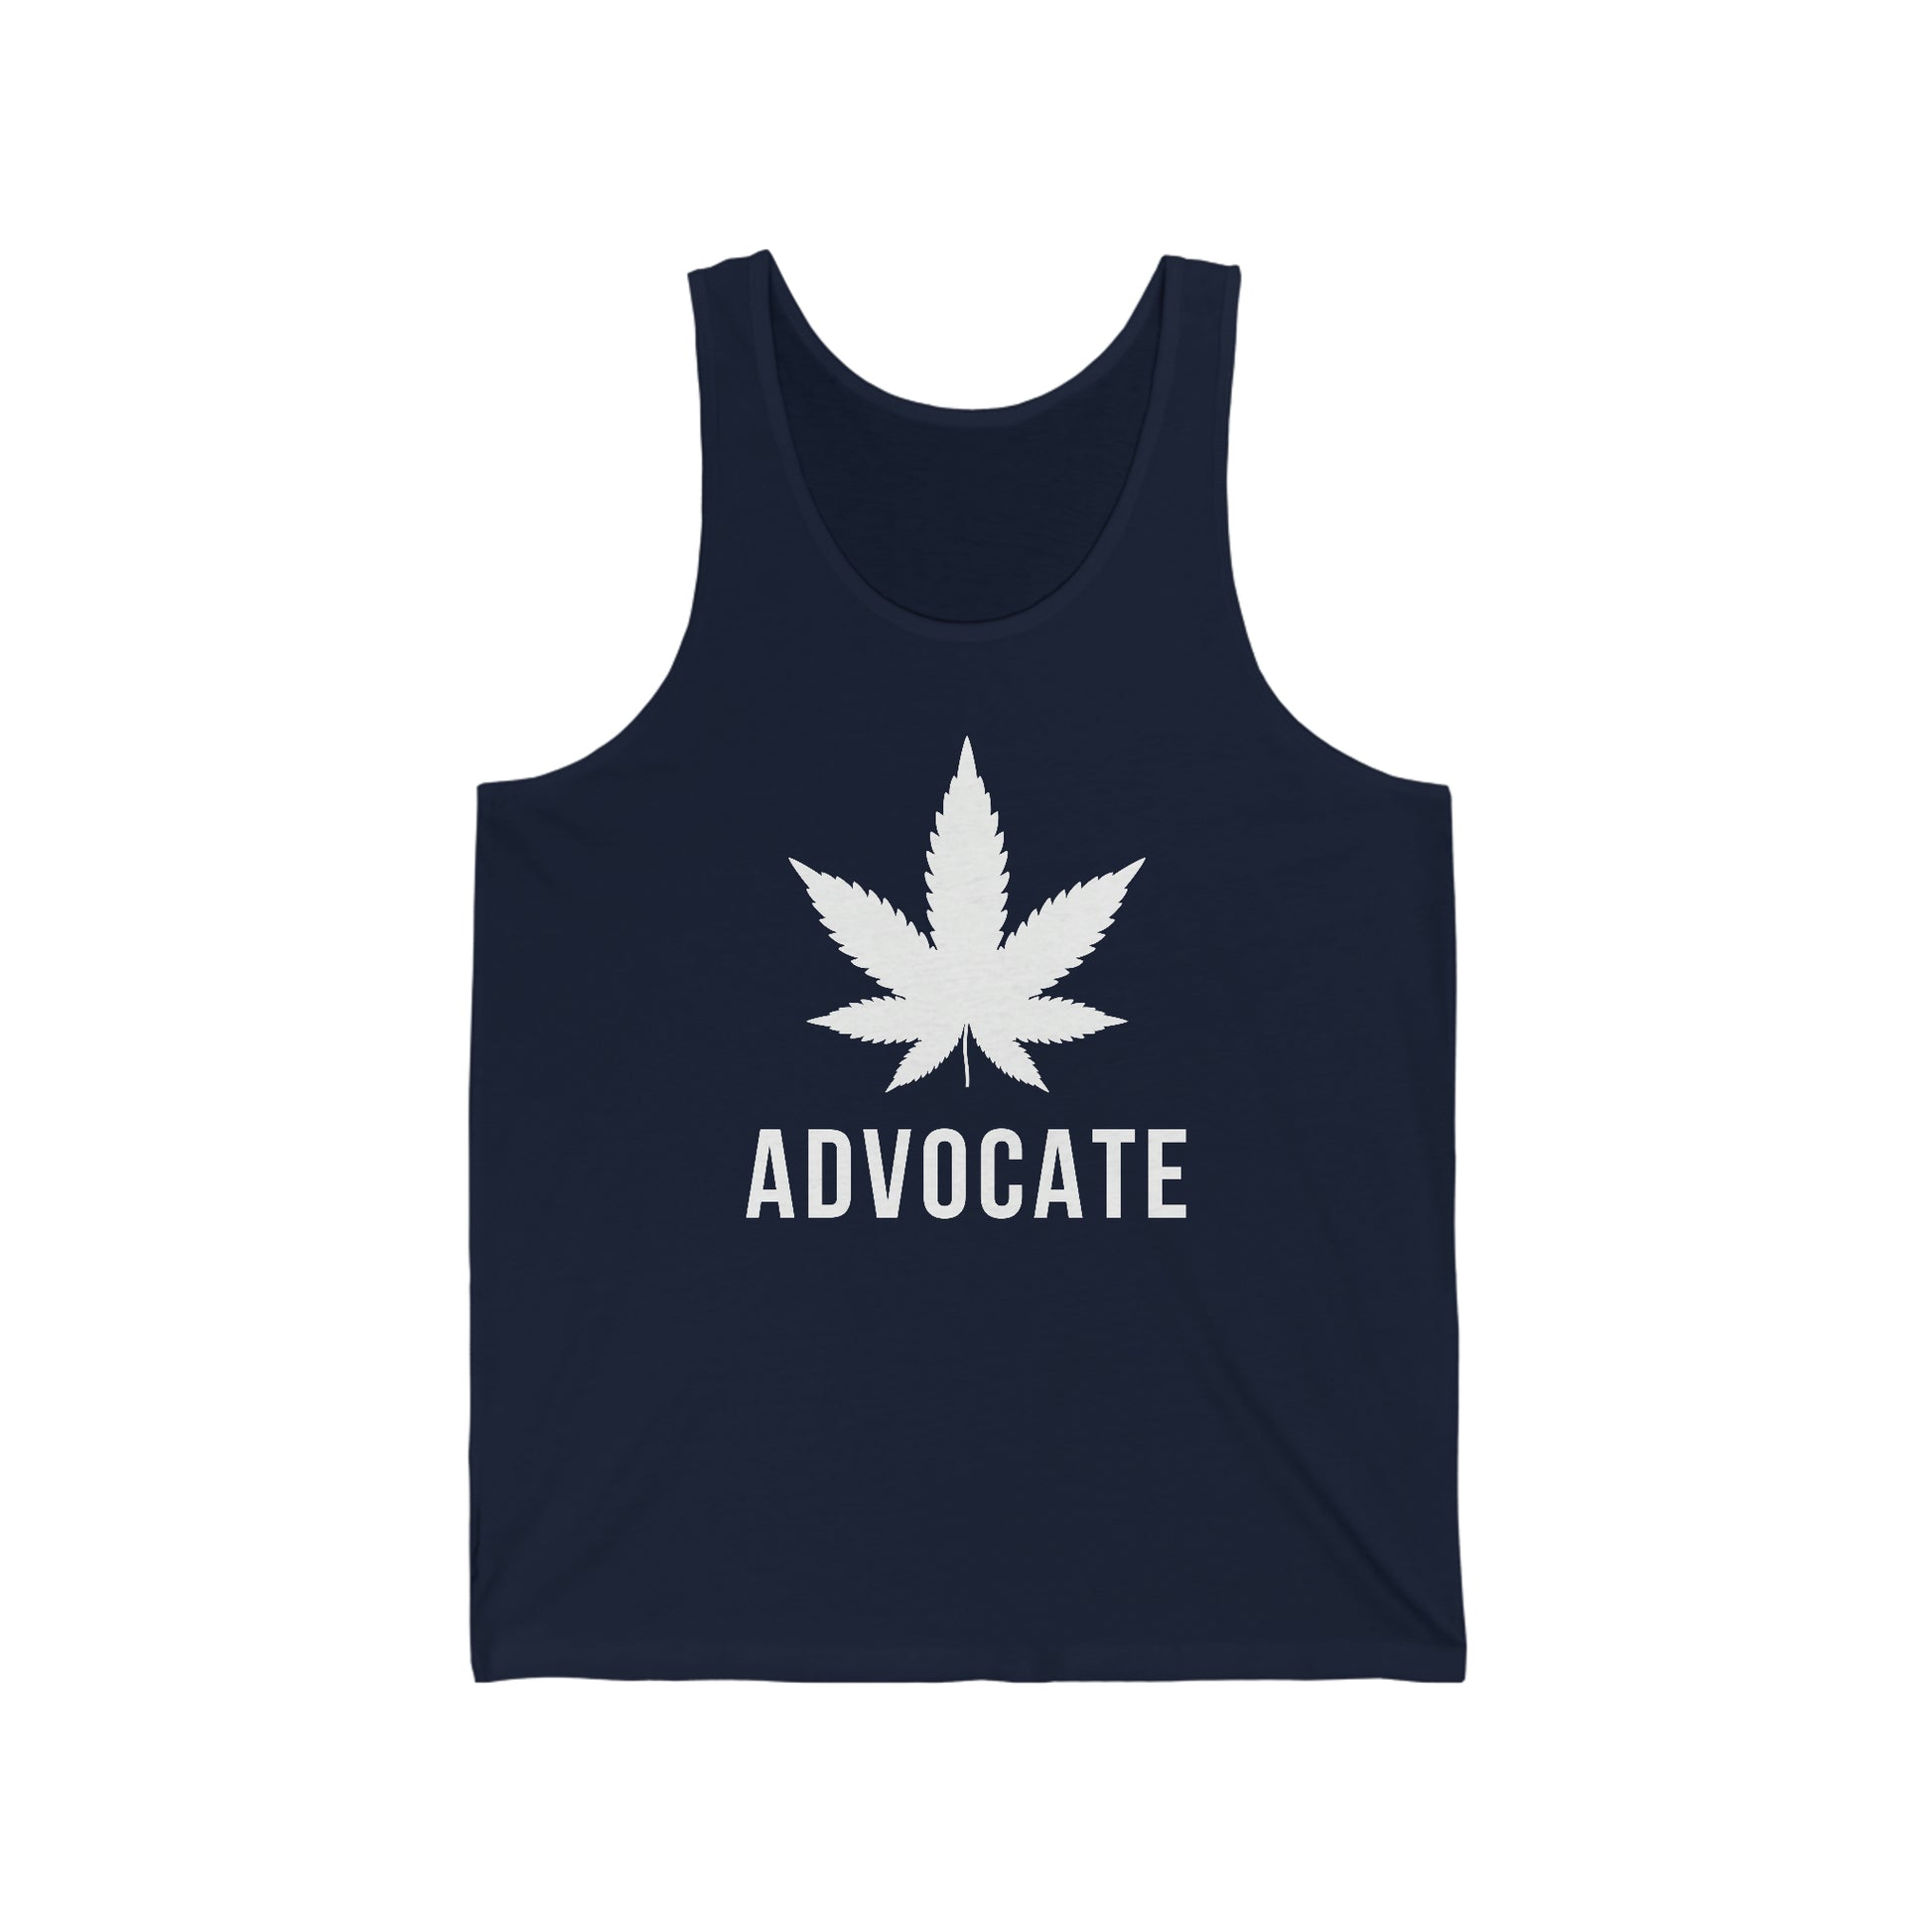 A navy blue jersey tank that reads "advocate" in big white letters, with a bigger marijuana leaf featured on the front and center.